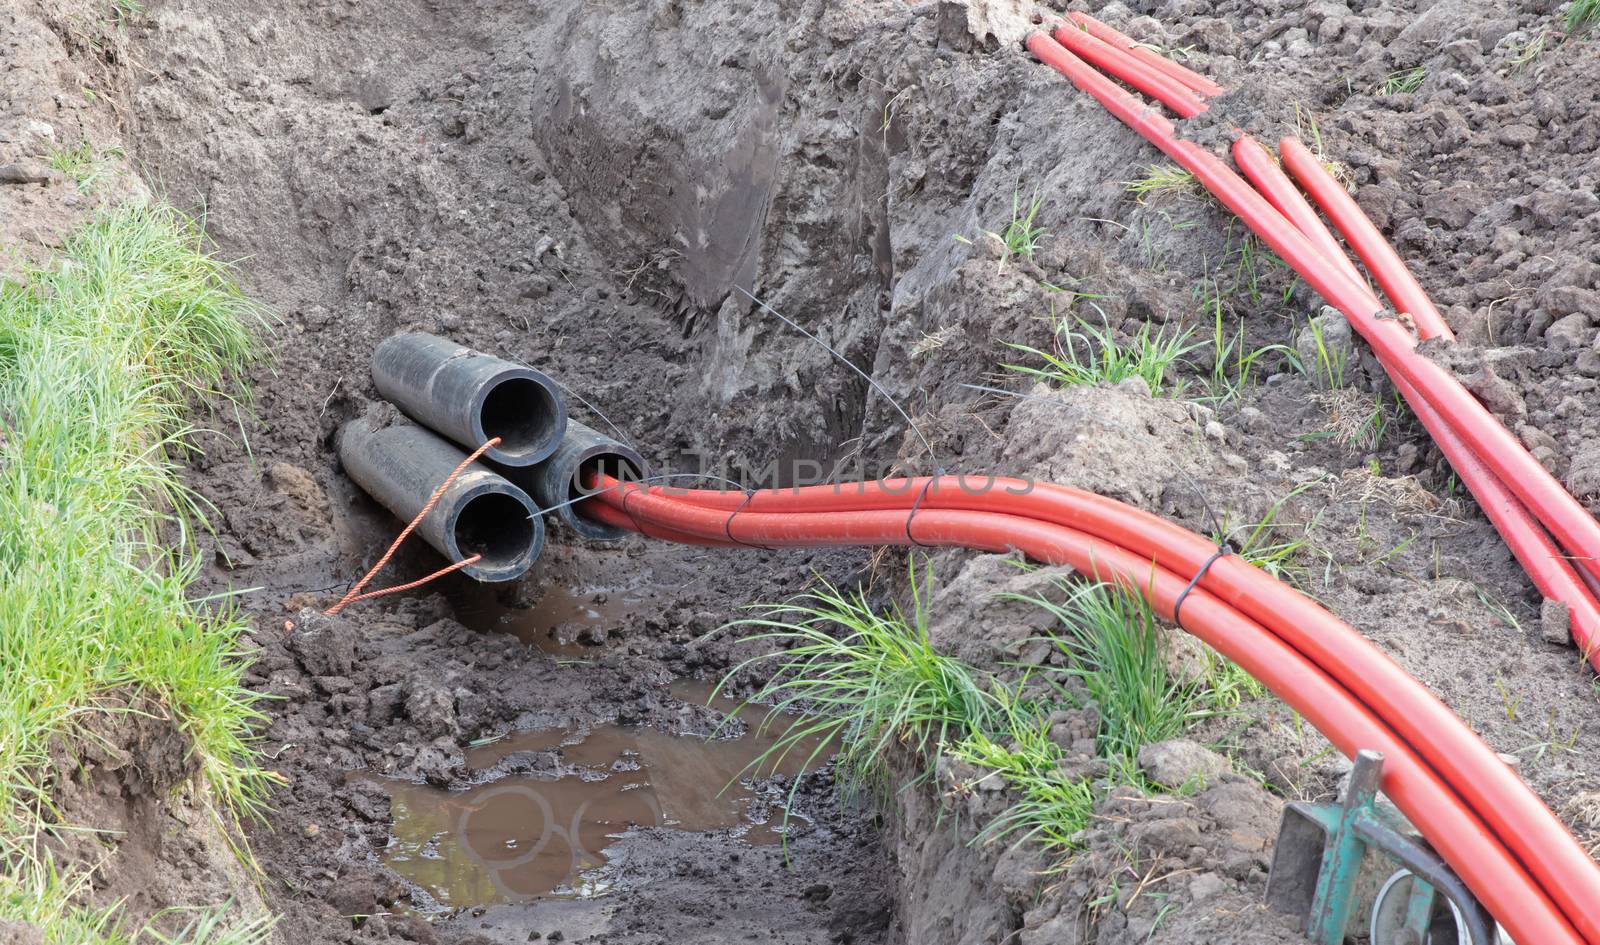 Installation of underground cable; electricity, internet or something else